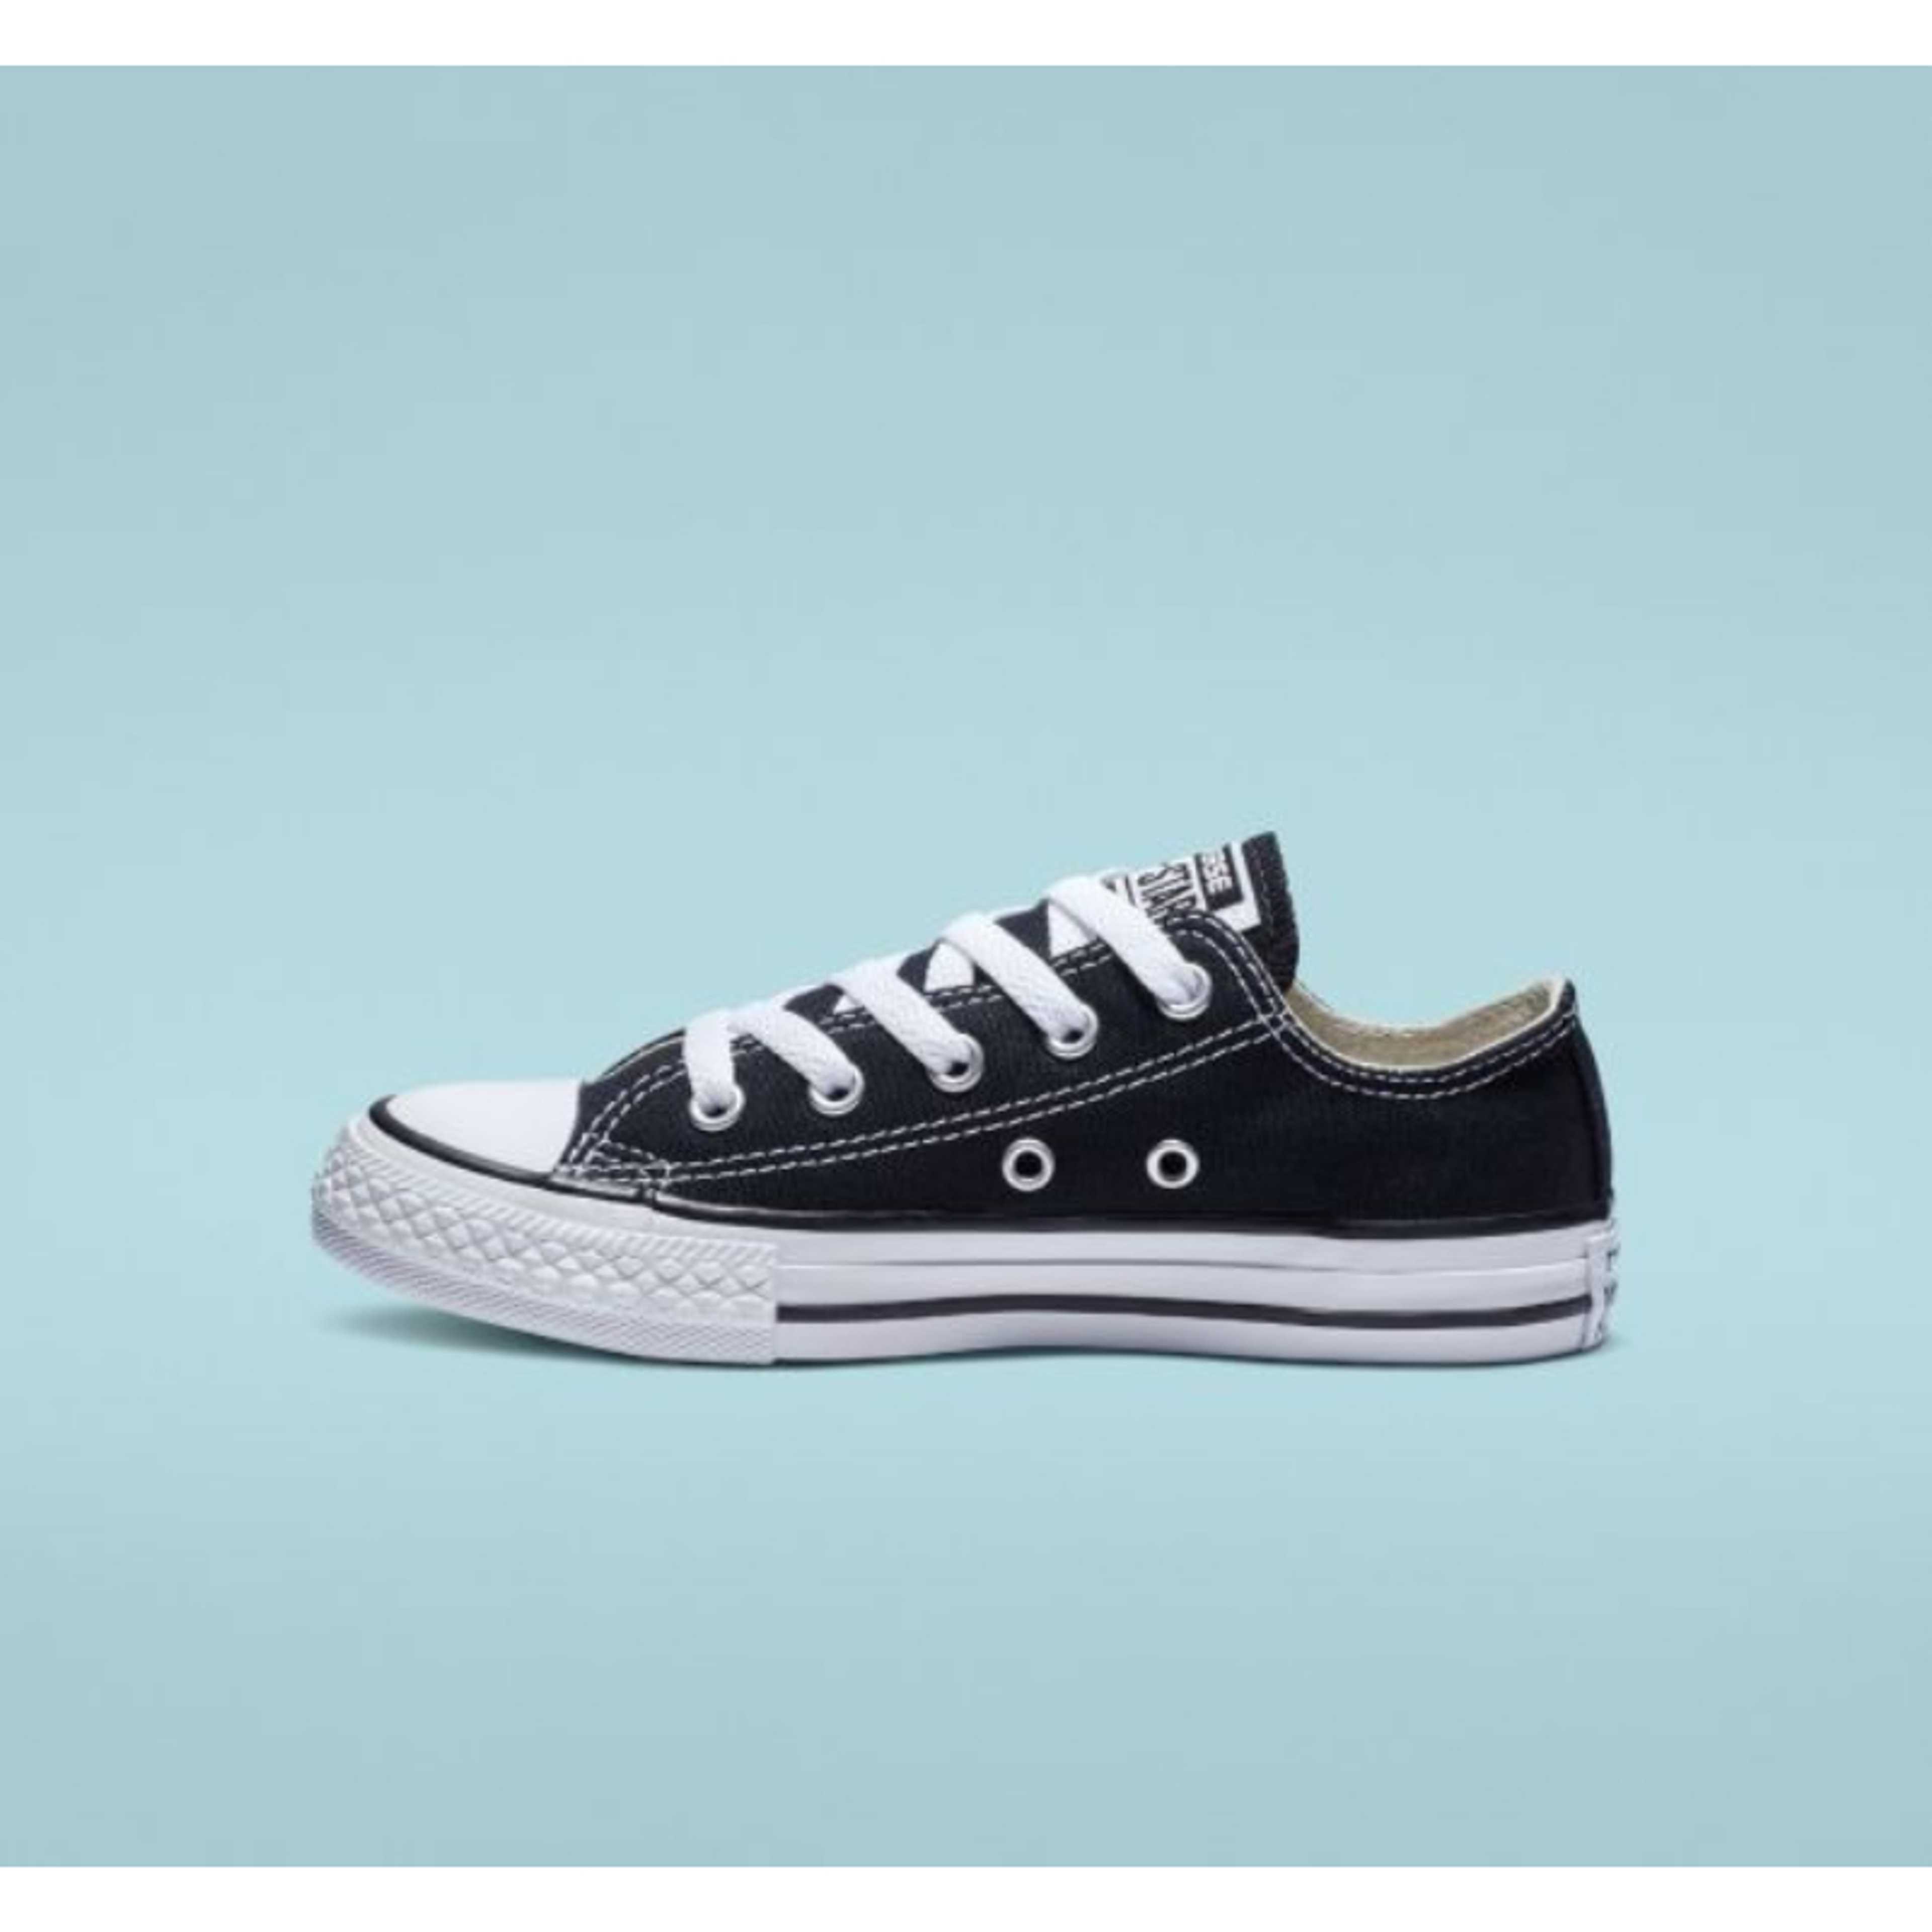 New Converse Chuck Taylor All Star Low TopC-87